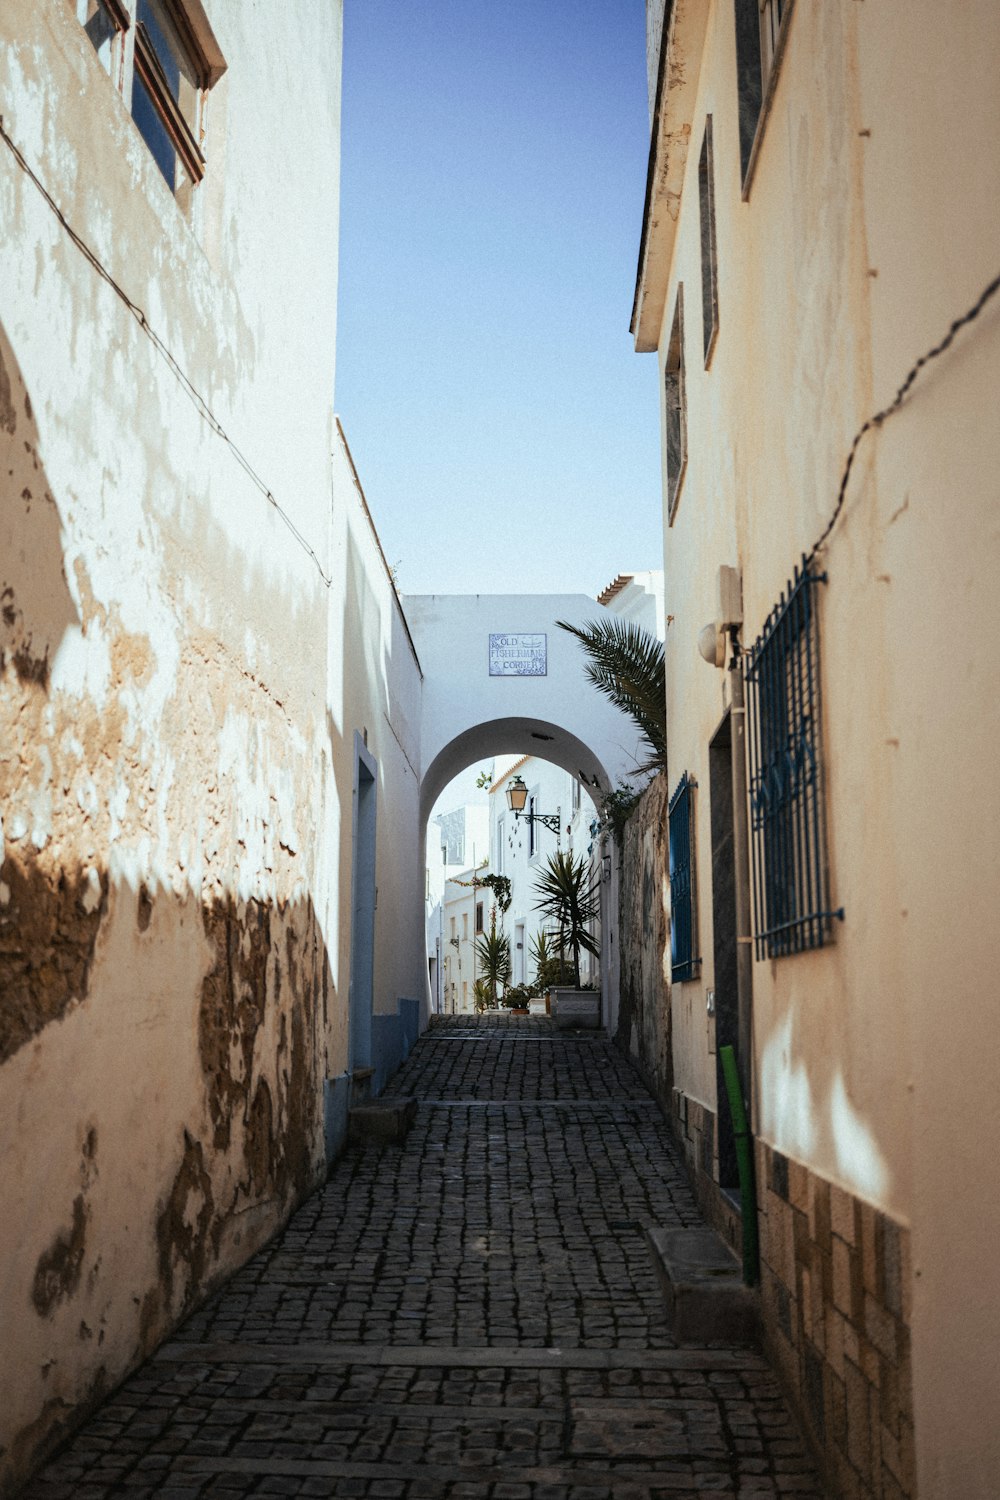 a narrow cobblestone street with an archway between two buildings